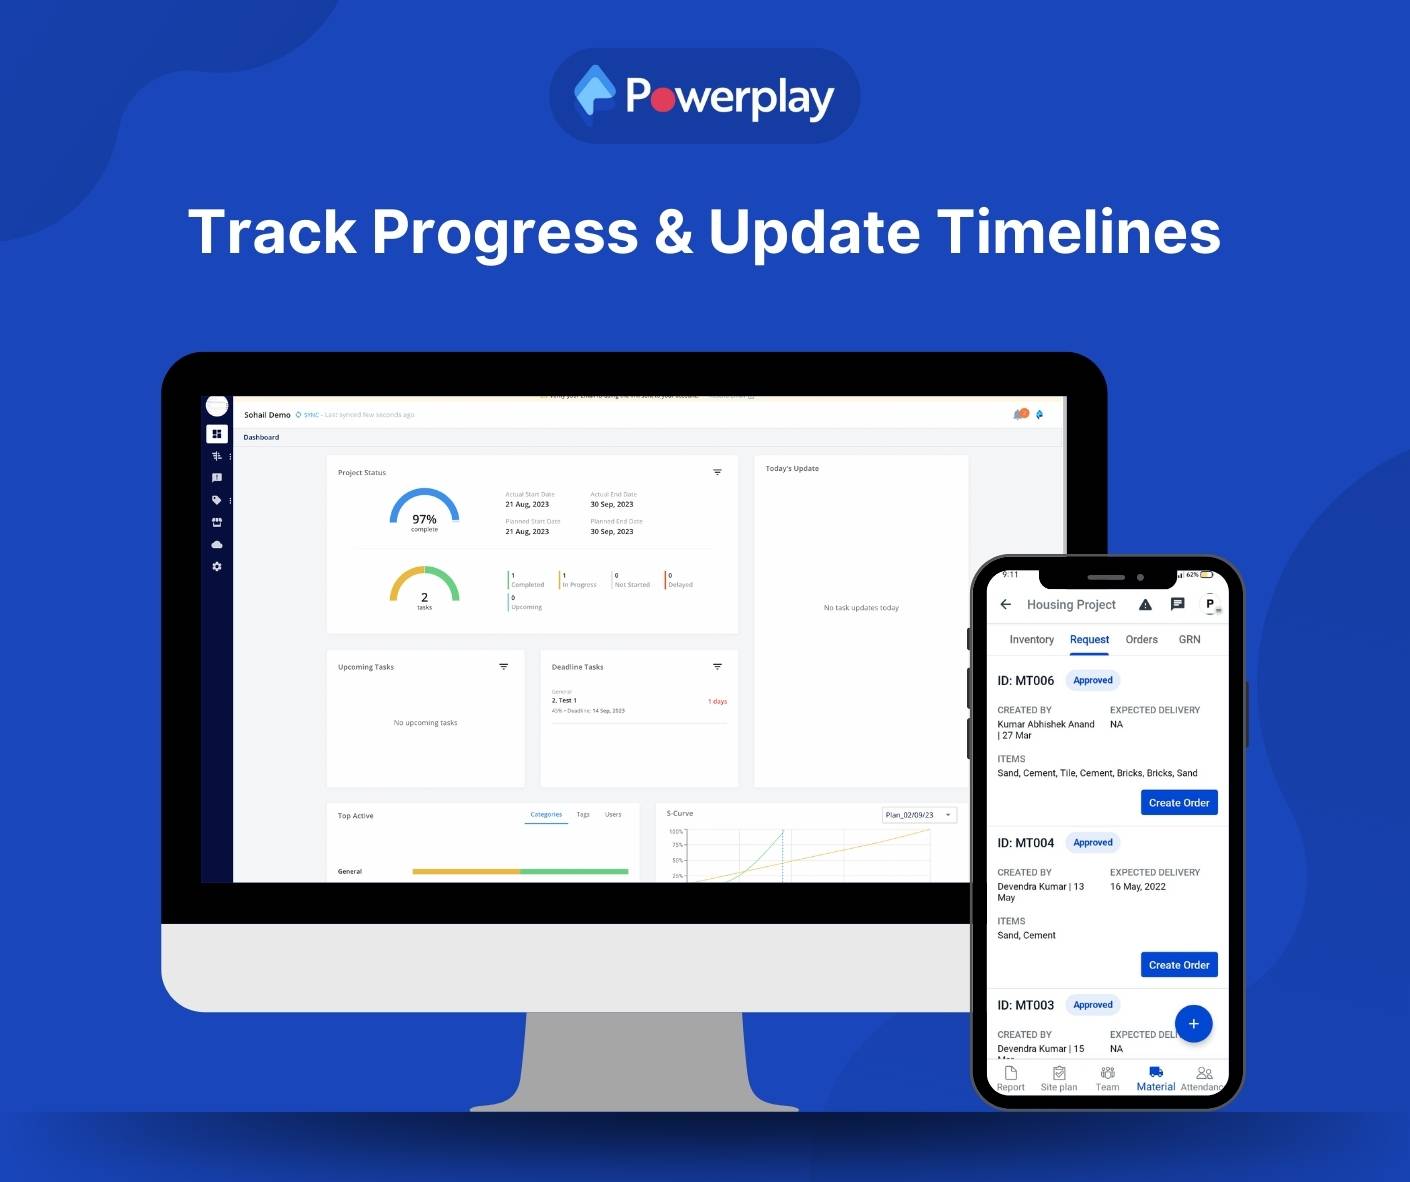 Track progress and update timelines